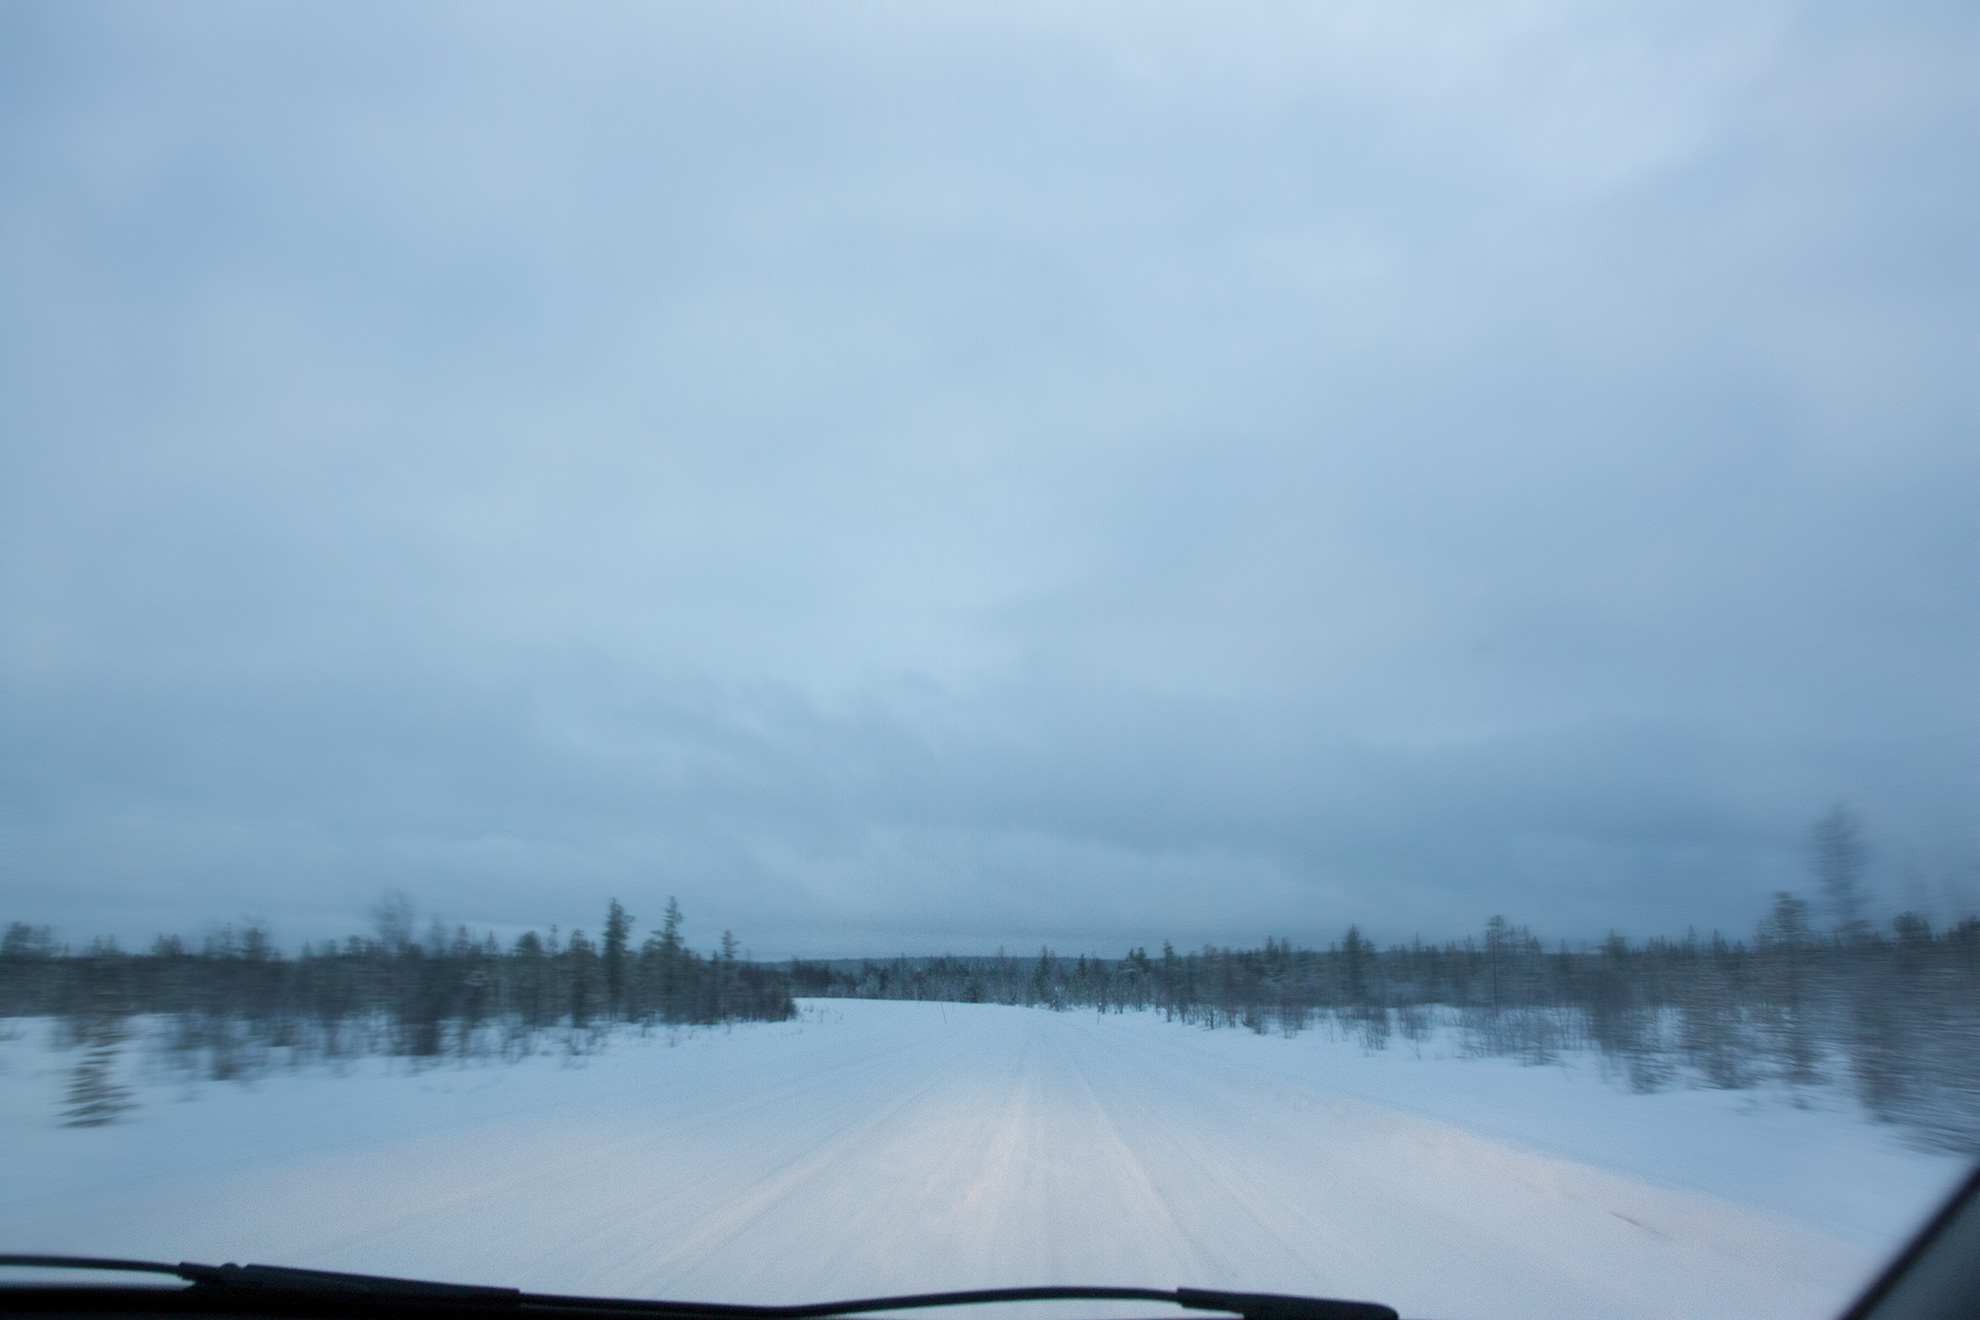 Highway in Finland, you drive around 100km/h on this.